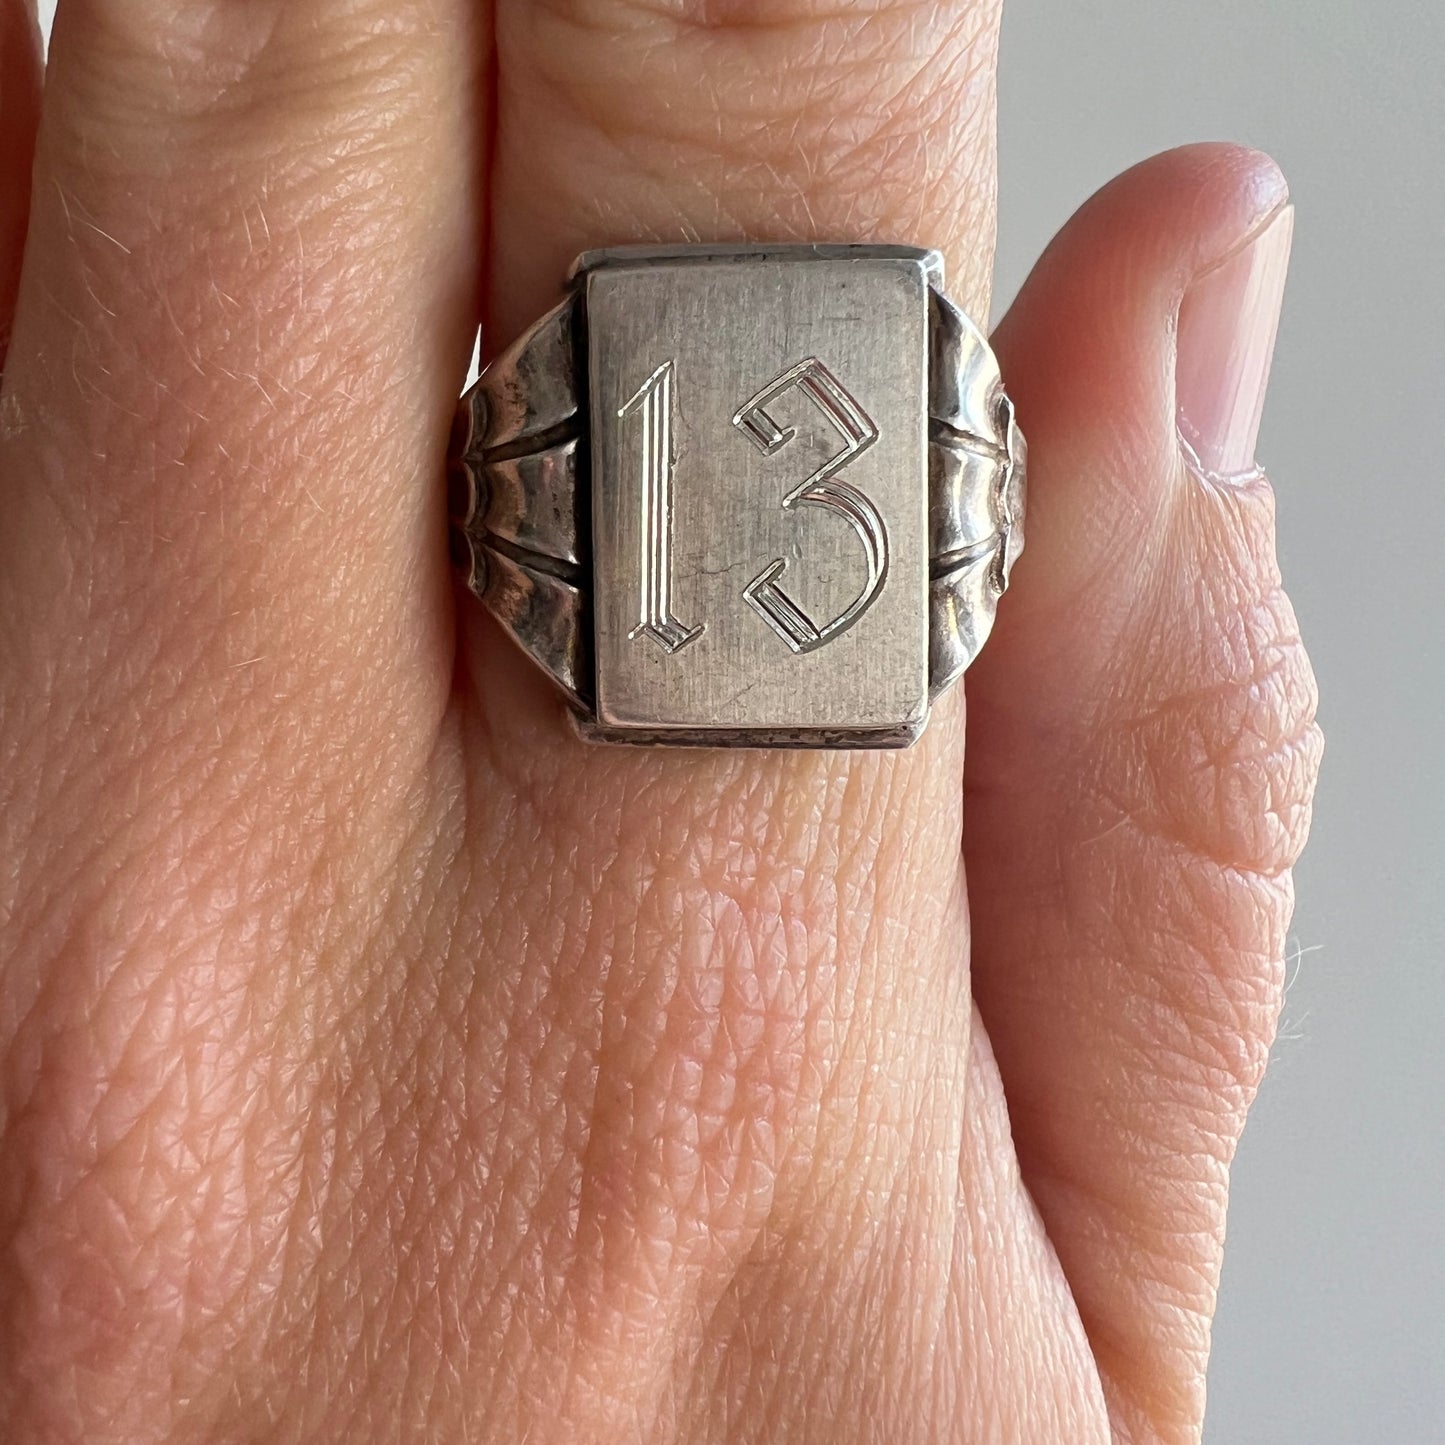 reimagined V I N T A G E // lucky 13 / 800 silver signet ring with new engraving / size 10.75